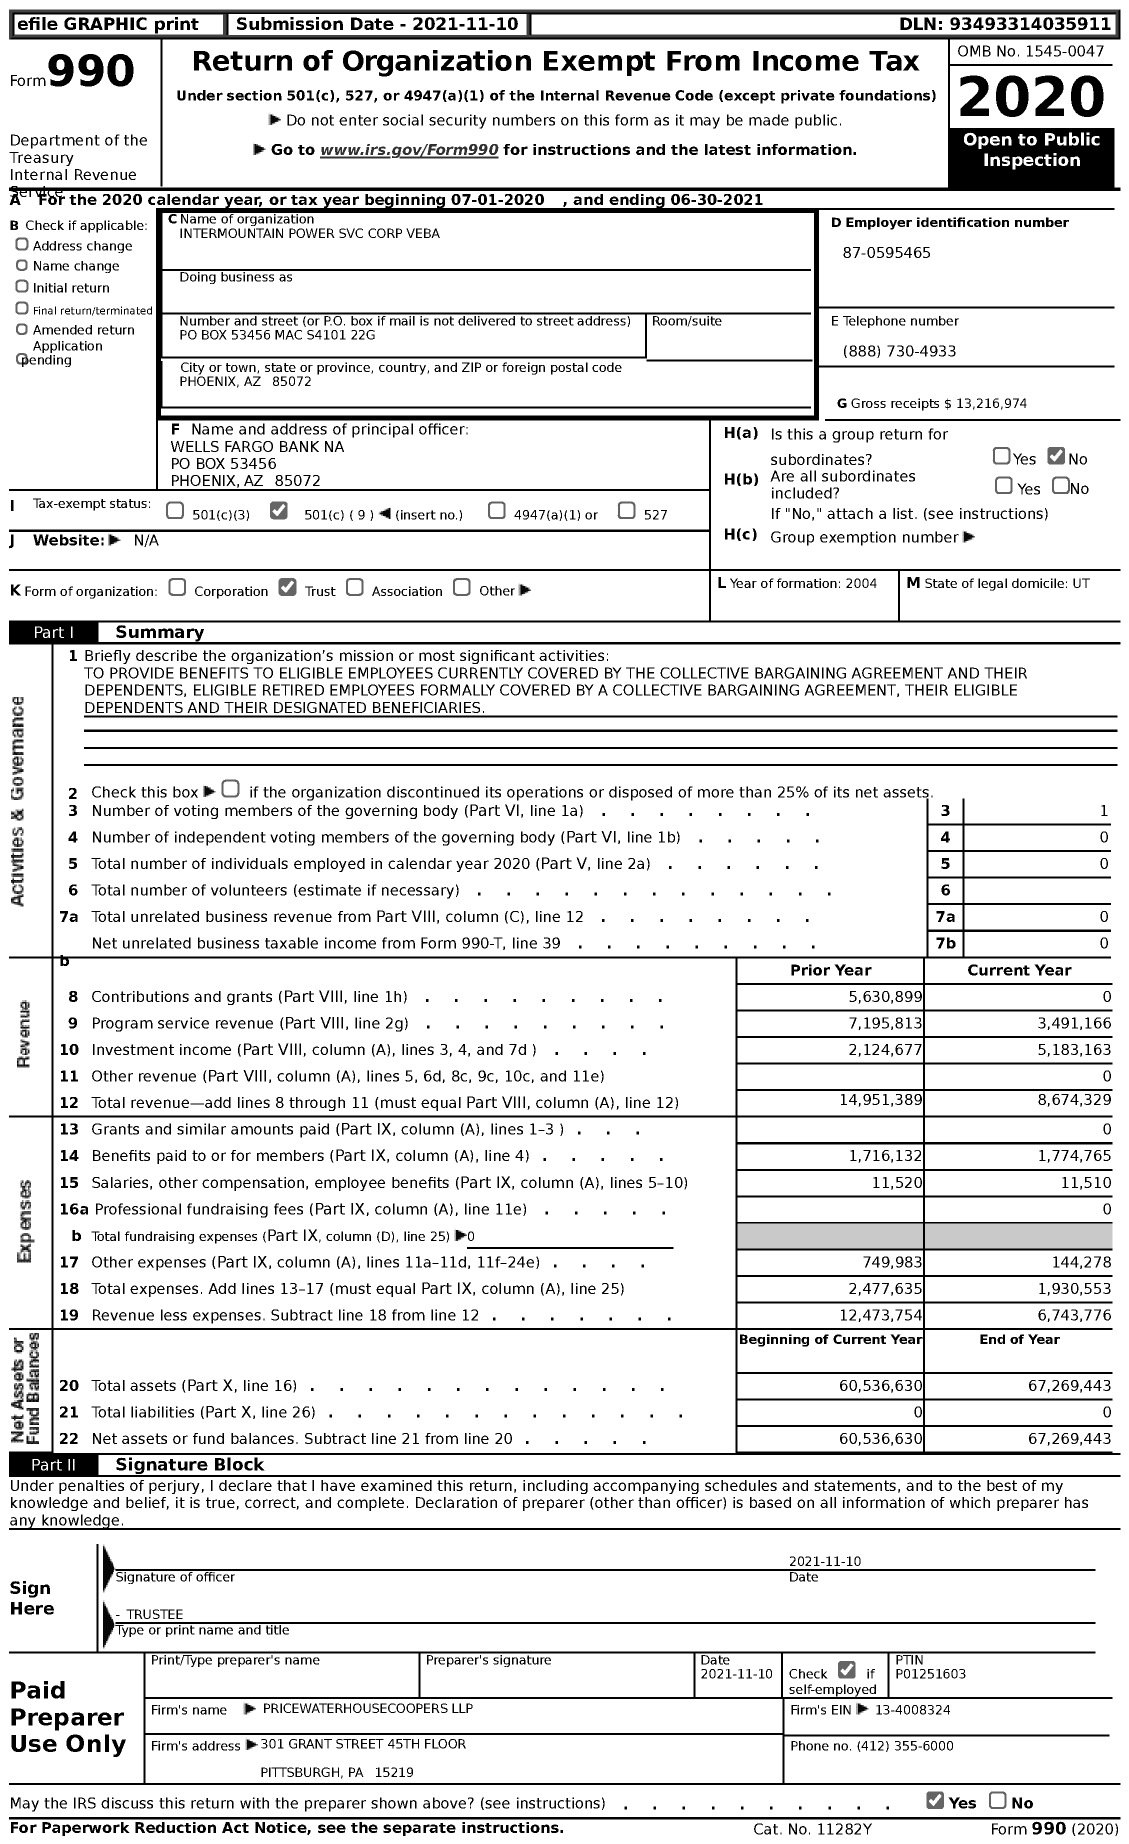 Image of first page of 2020 Form 990 for Intermountain Power Service Corp Veba